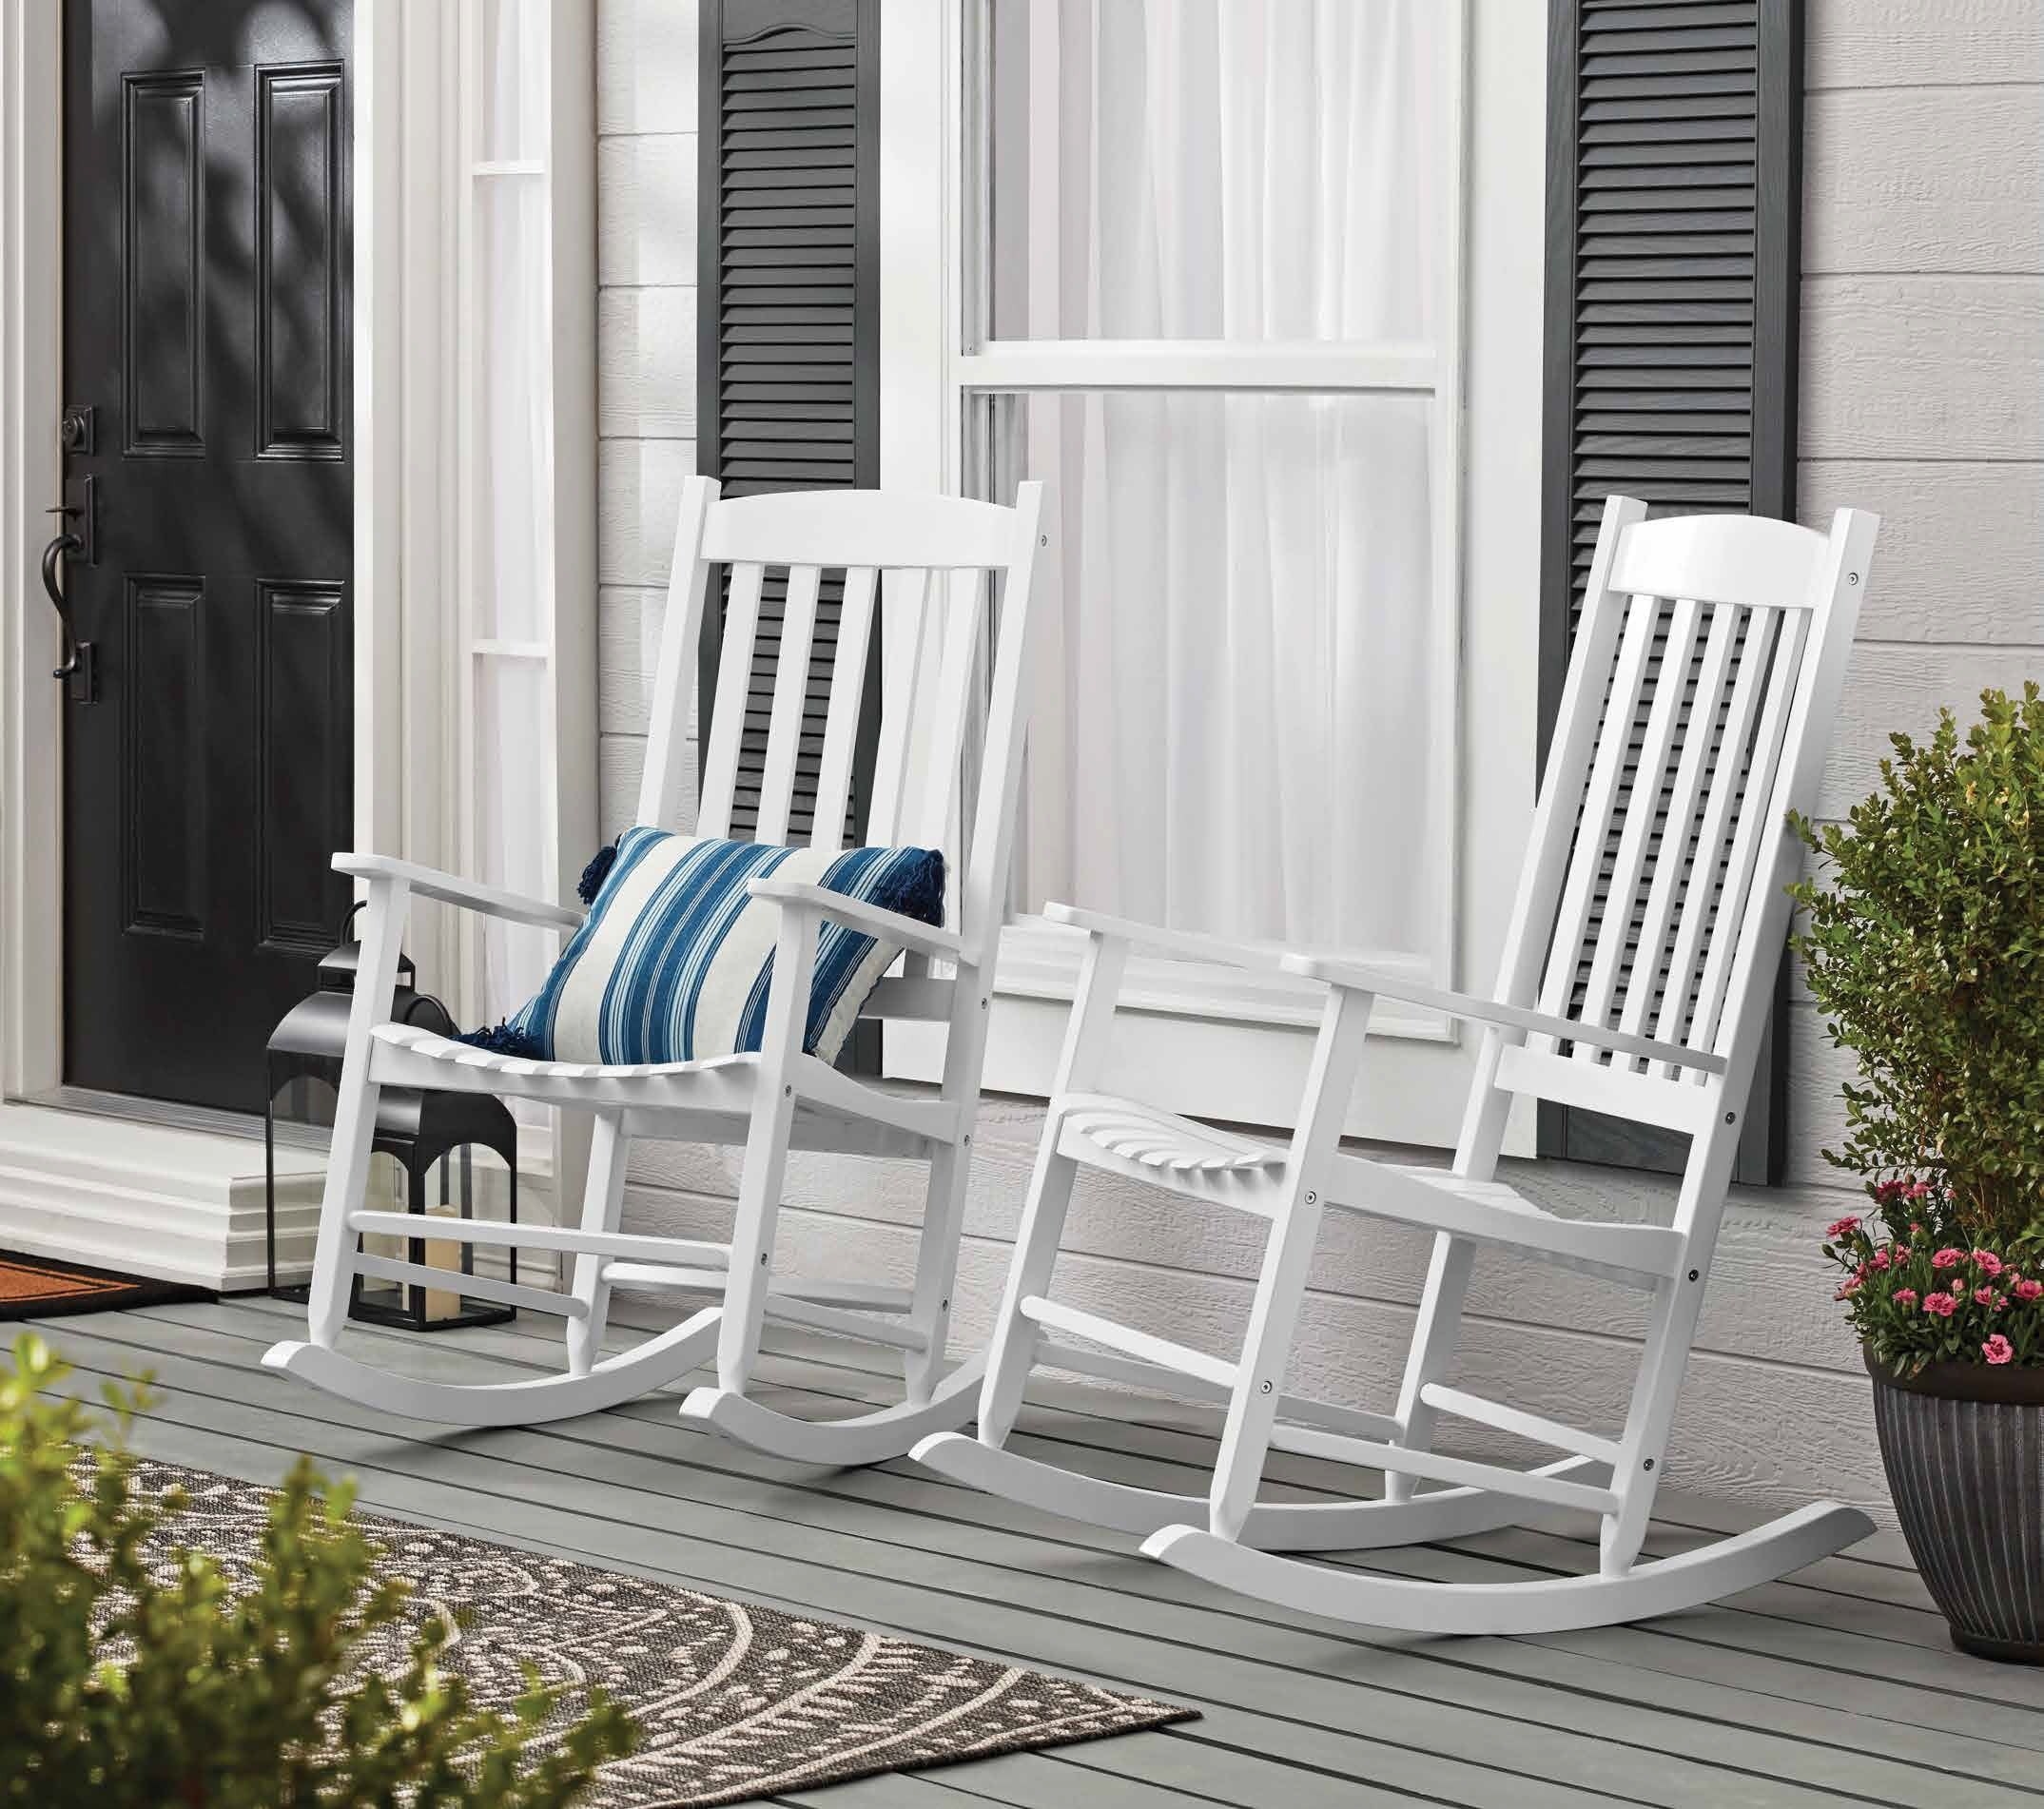 Two white rocking chairs on porch